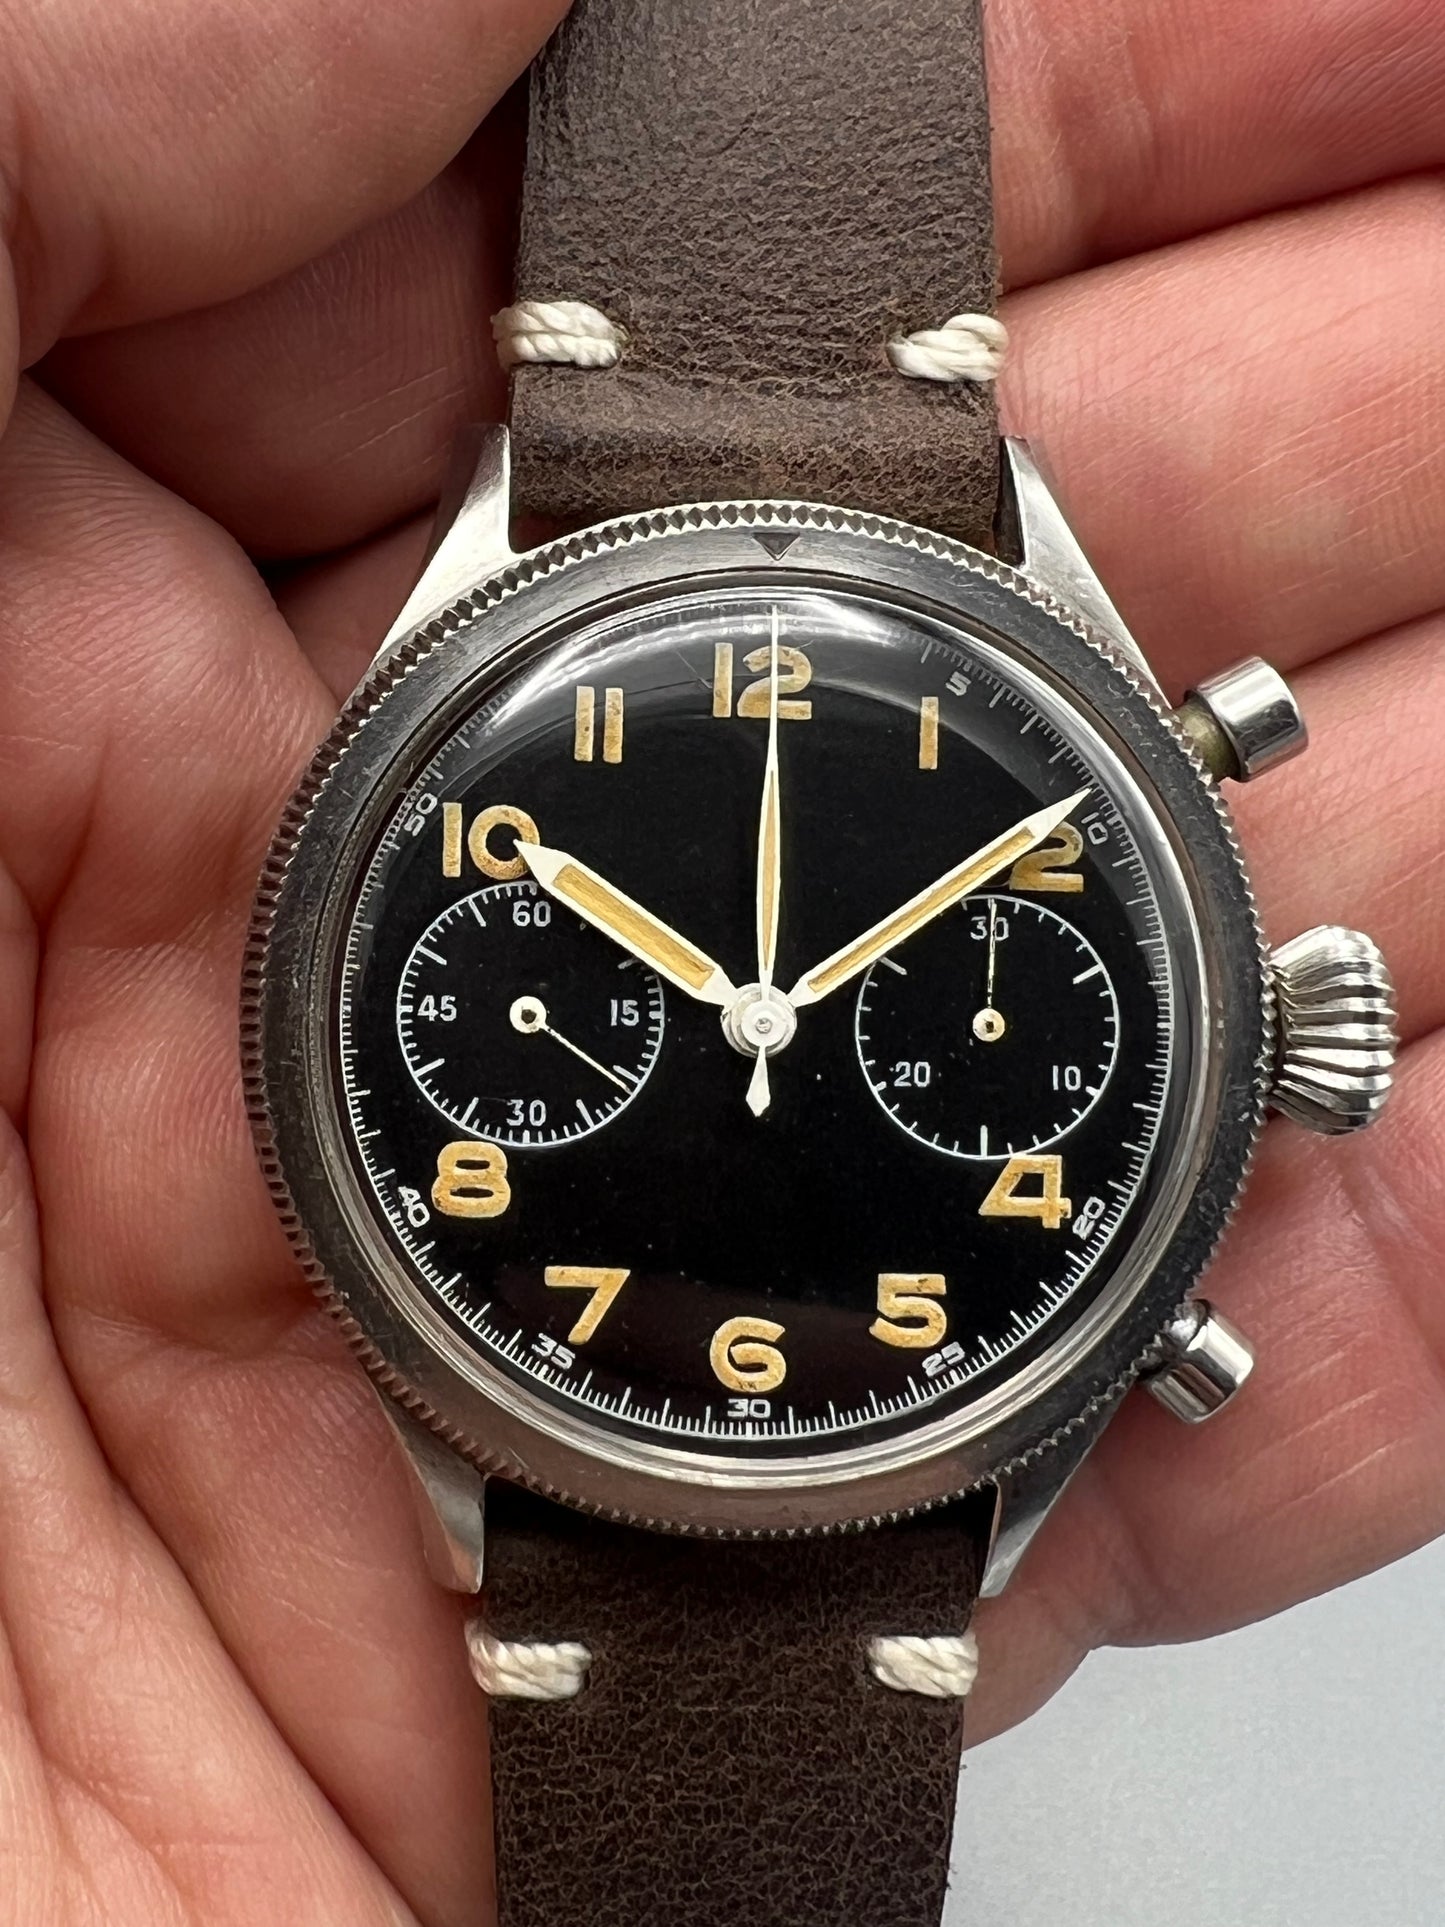 Breguet Type 20 Sterile Dial 1956 Unpolished, Rare Unrestored French Military Service Watch